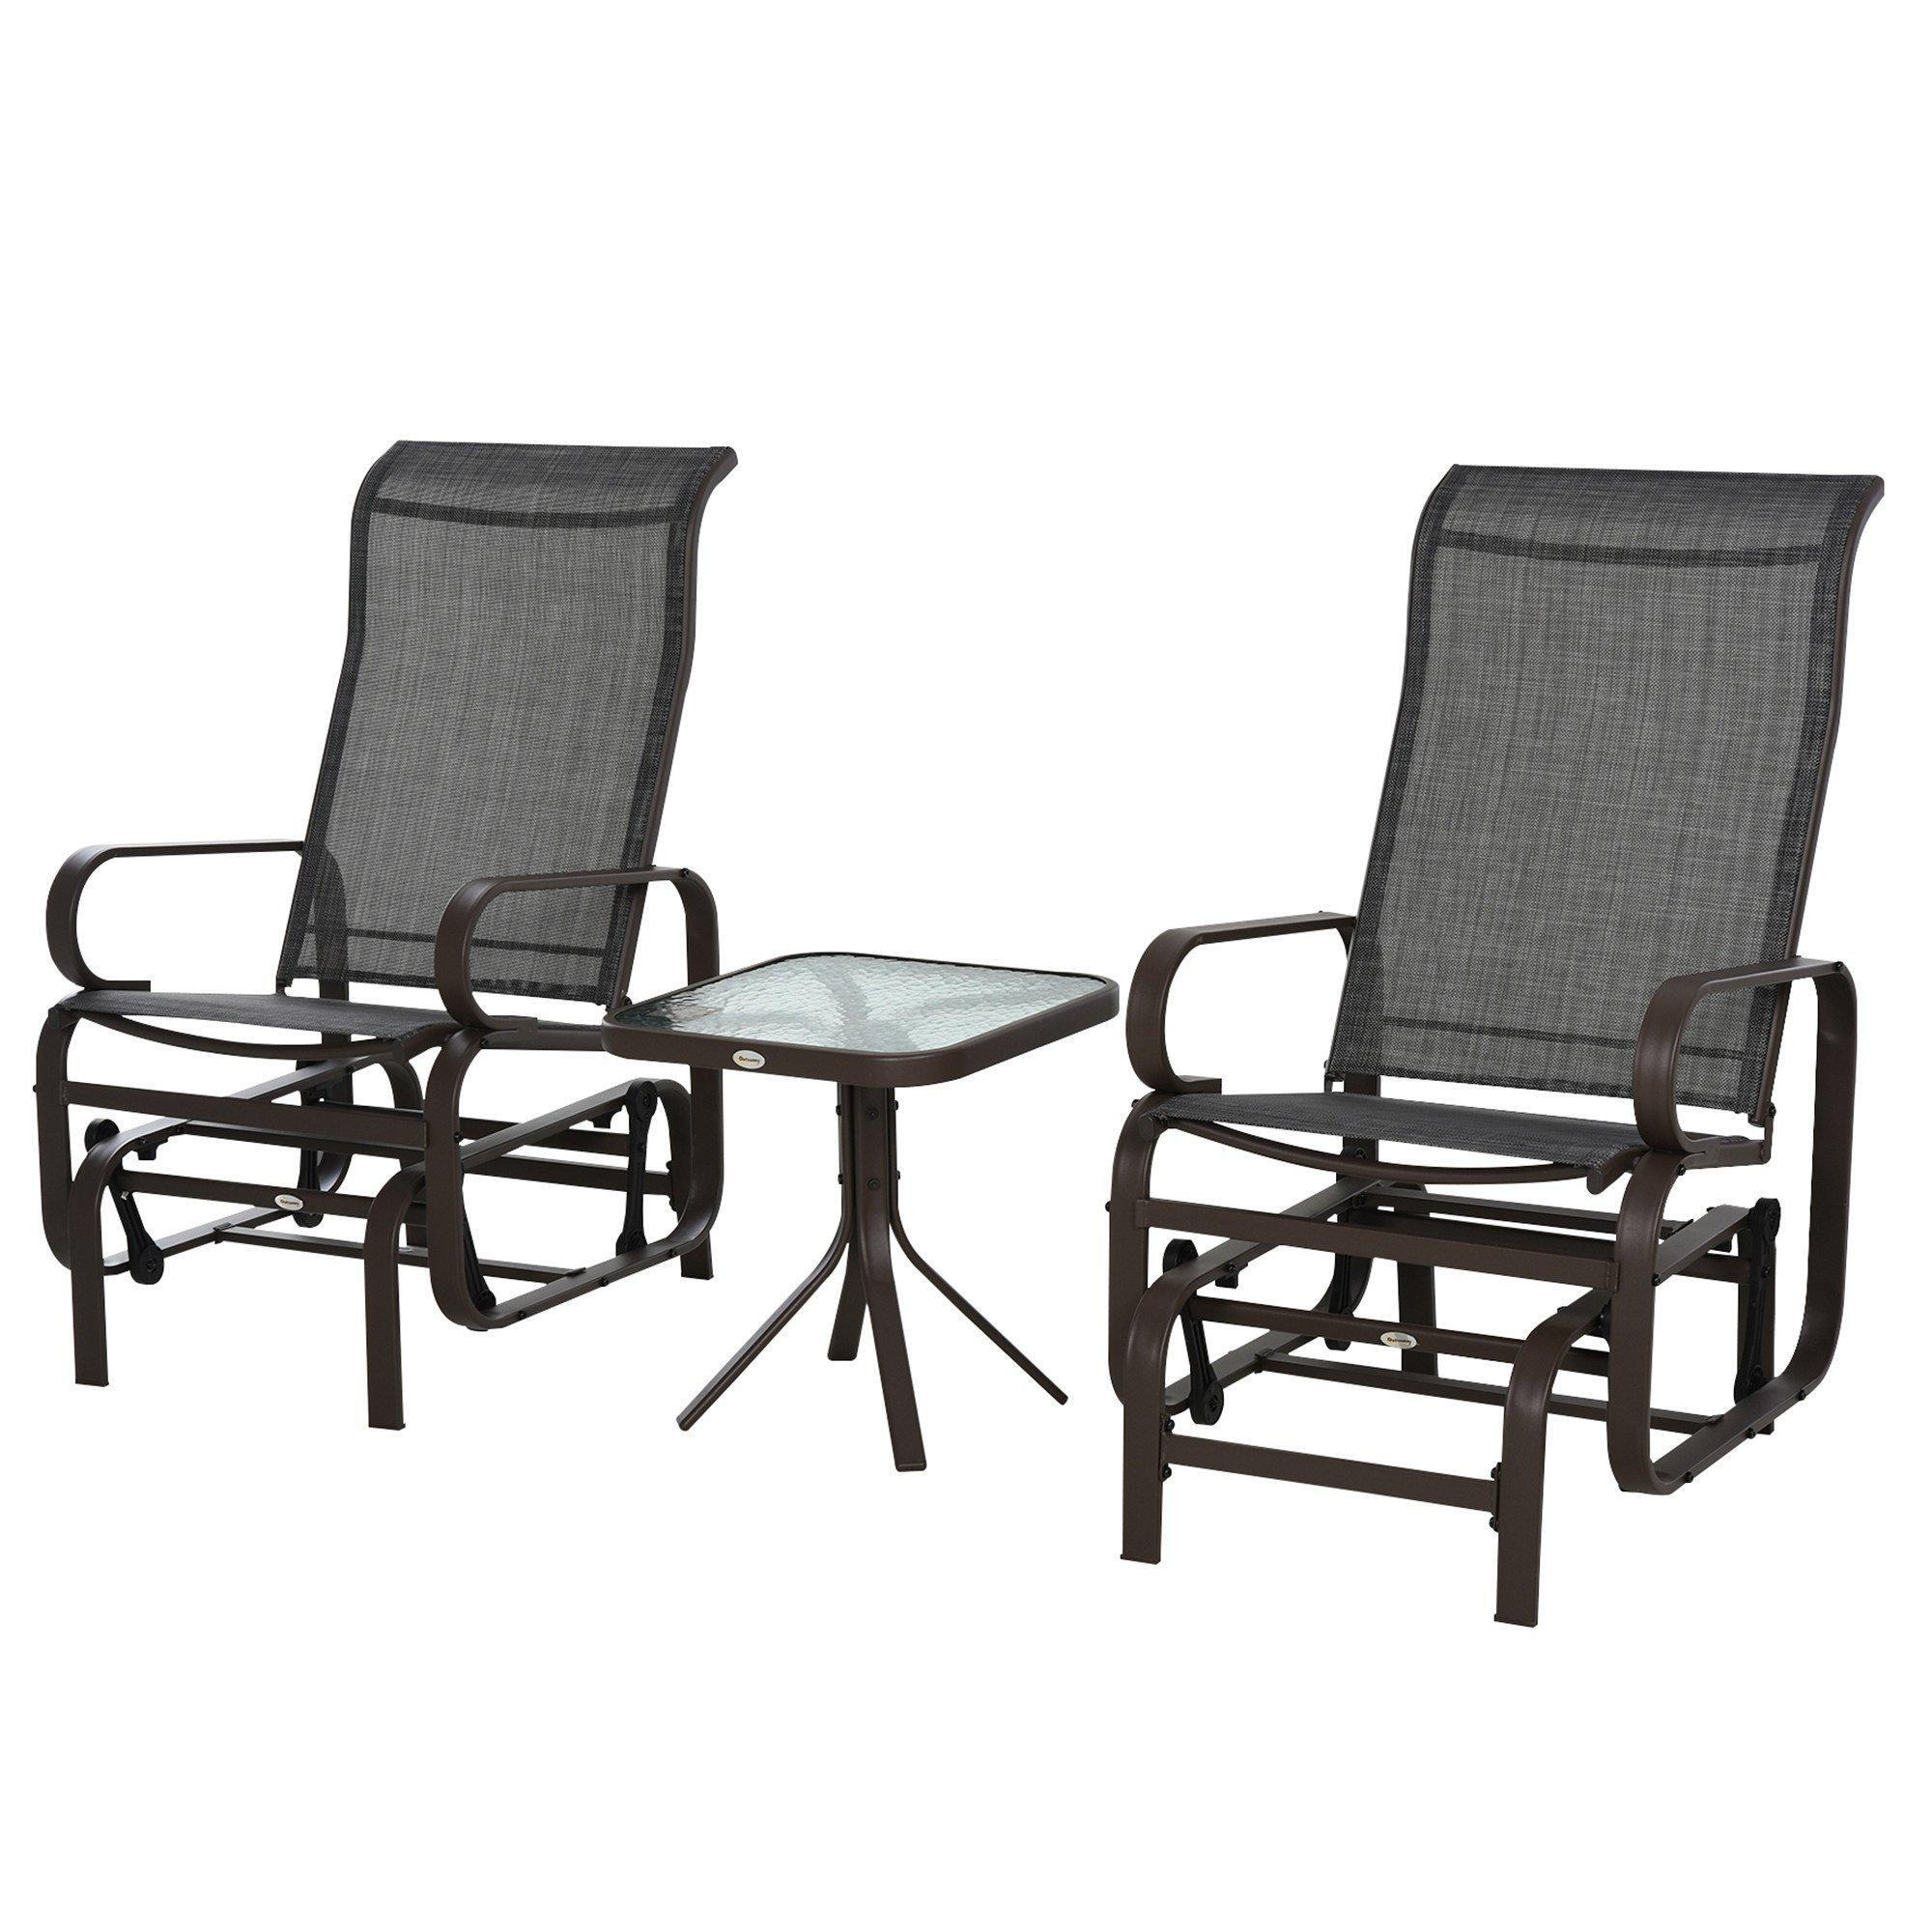 3 Pcs Rocking Chair Gliding Chair Set with Table for Patio Garden - image 1